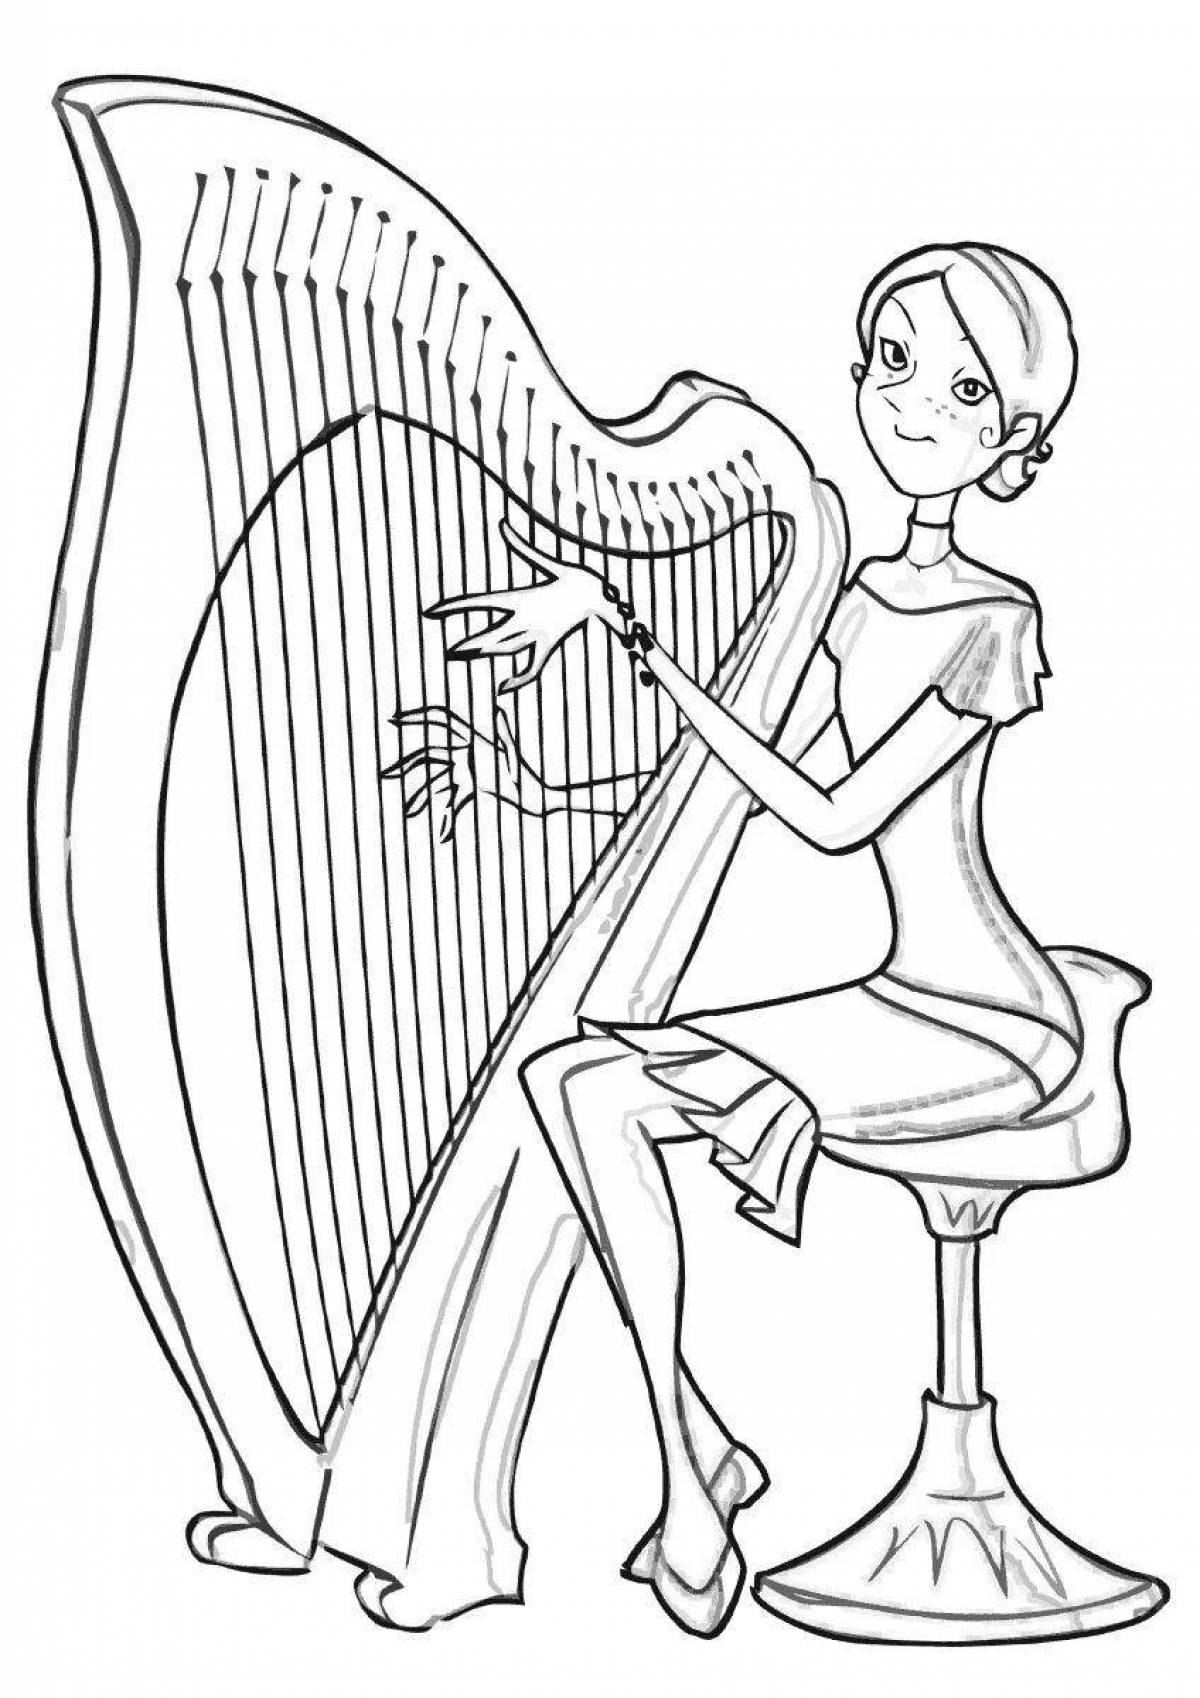 Awesome harp coloring page